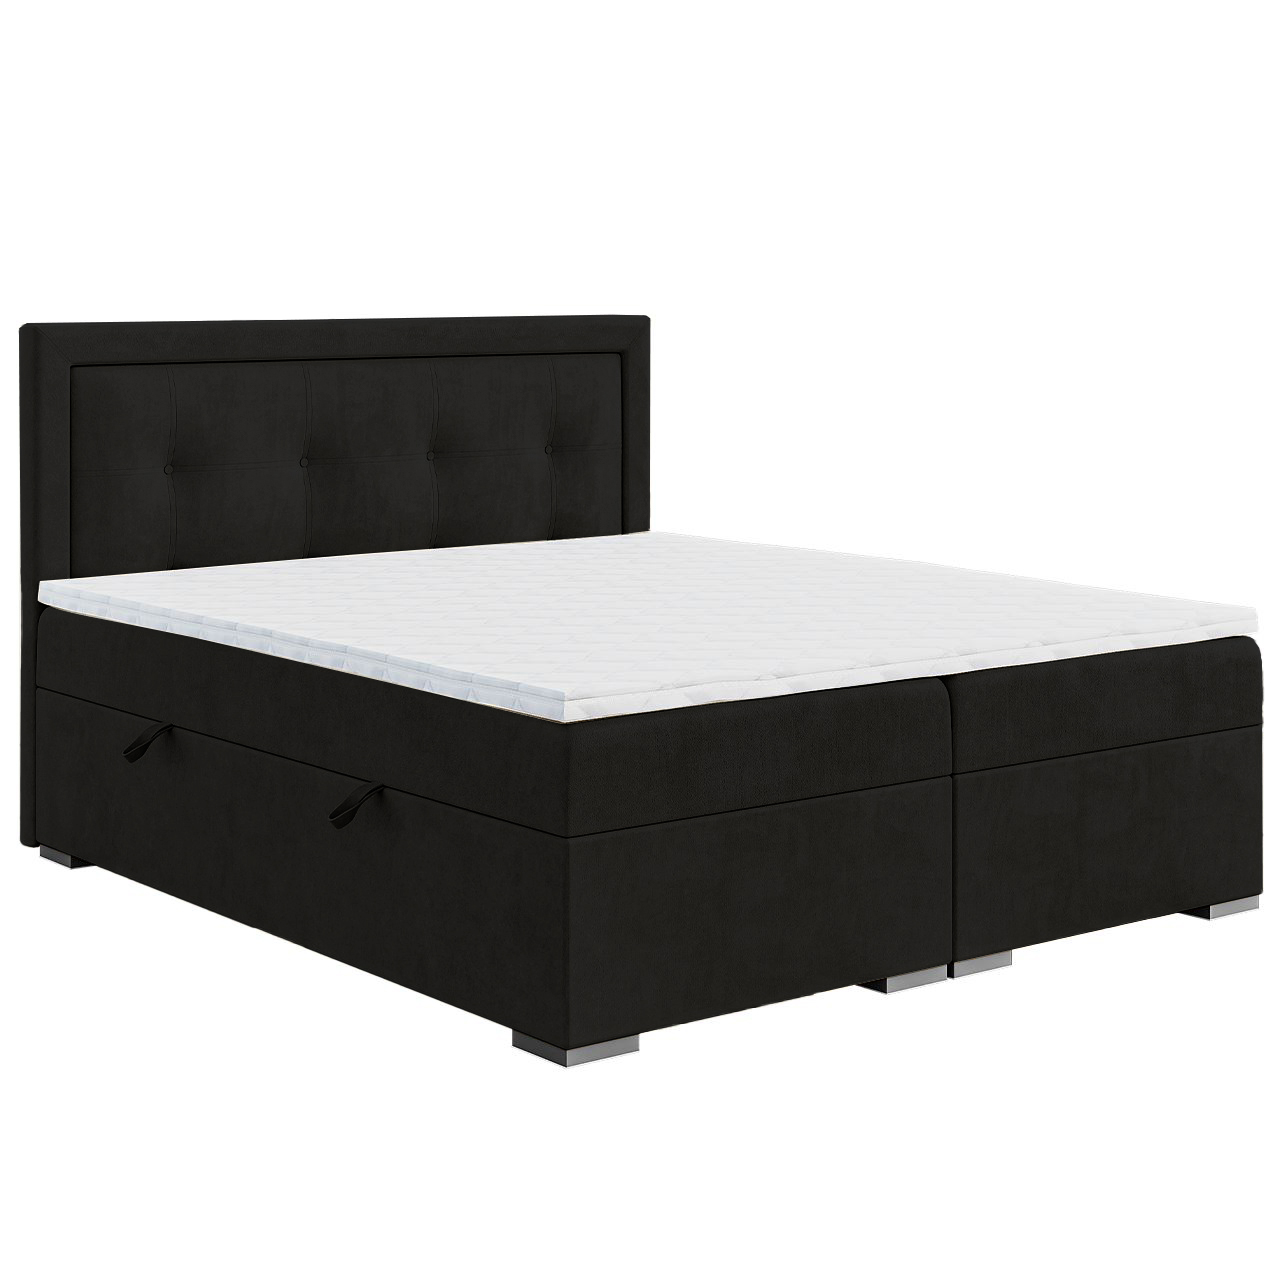 Upholstered bed VERI 160x200 riviera 100